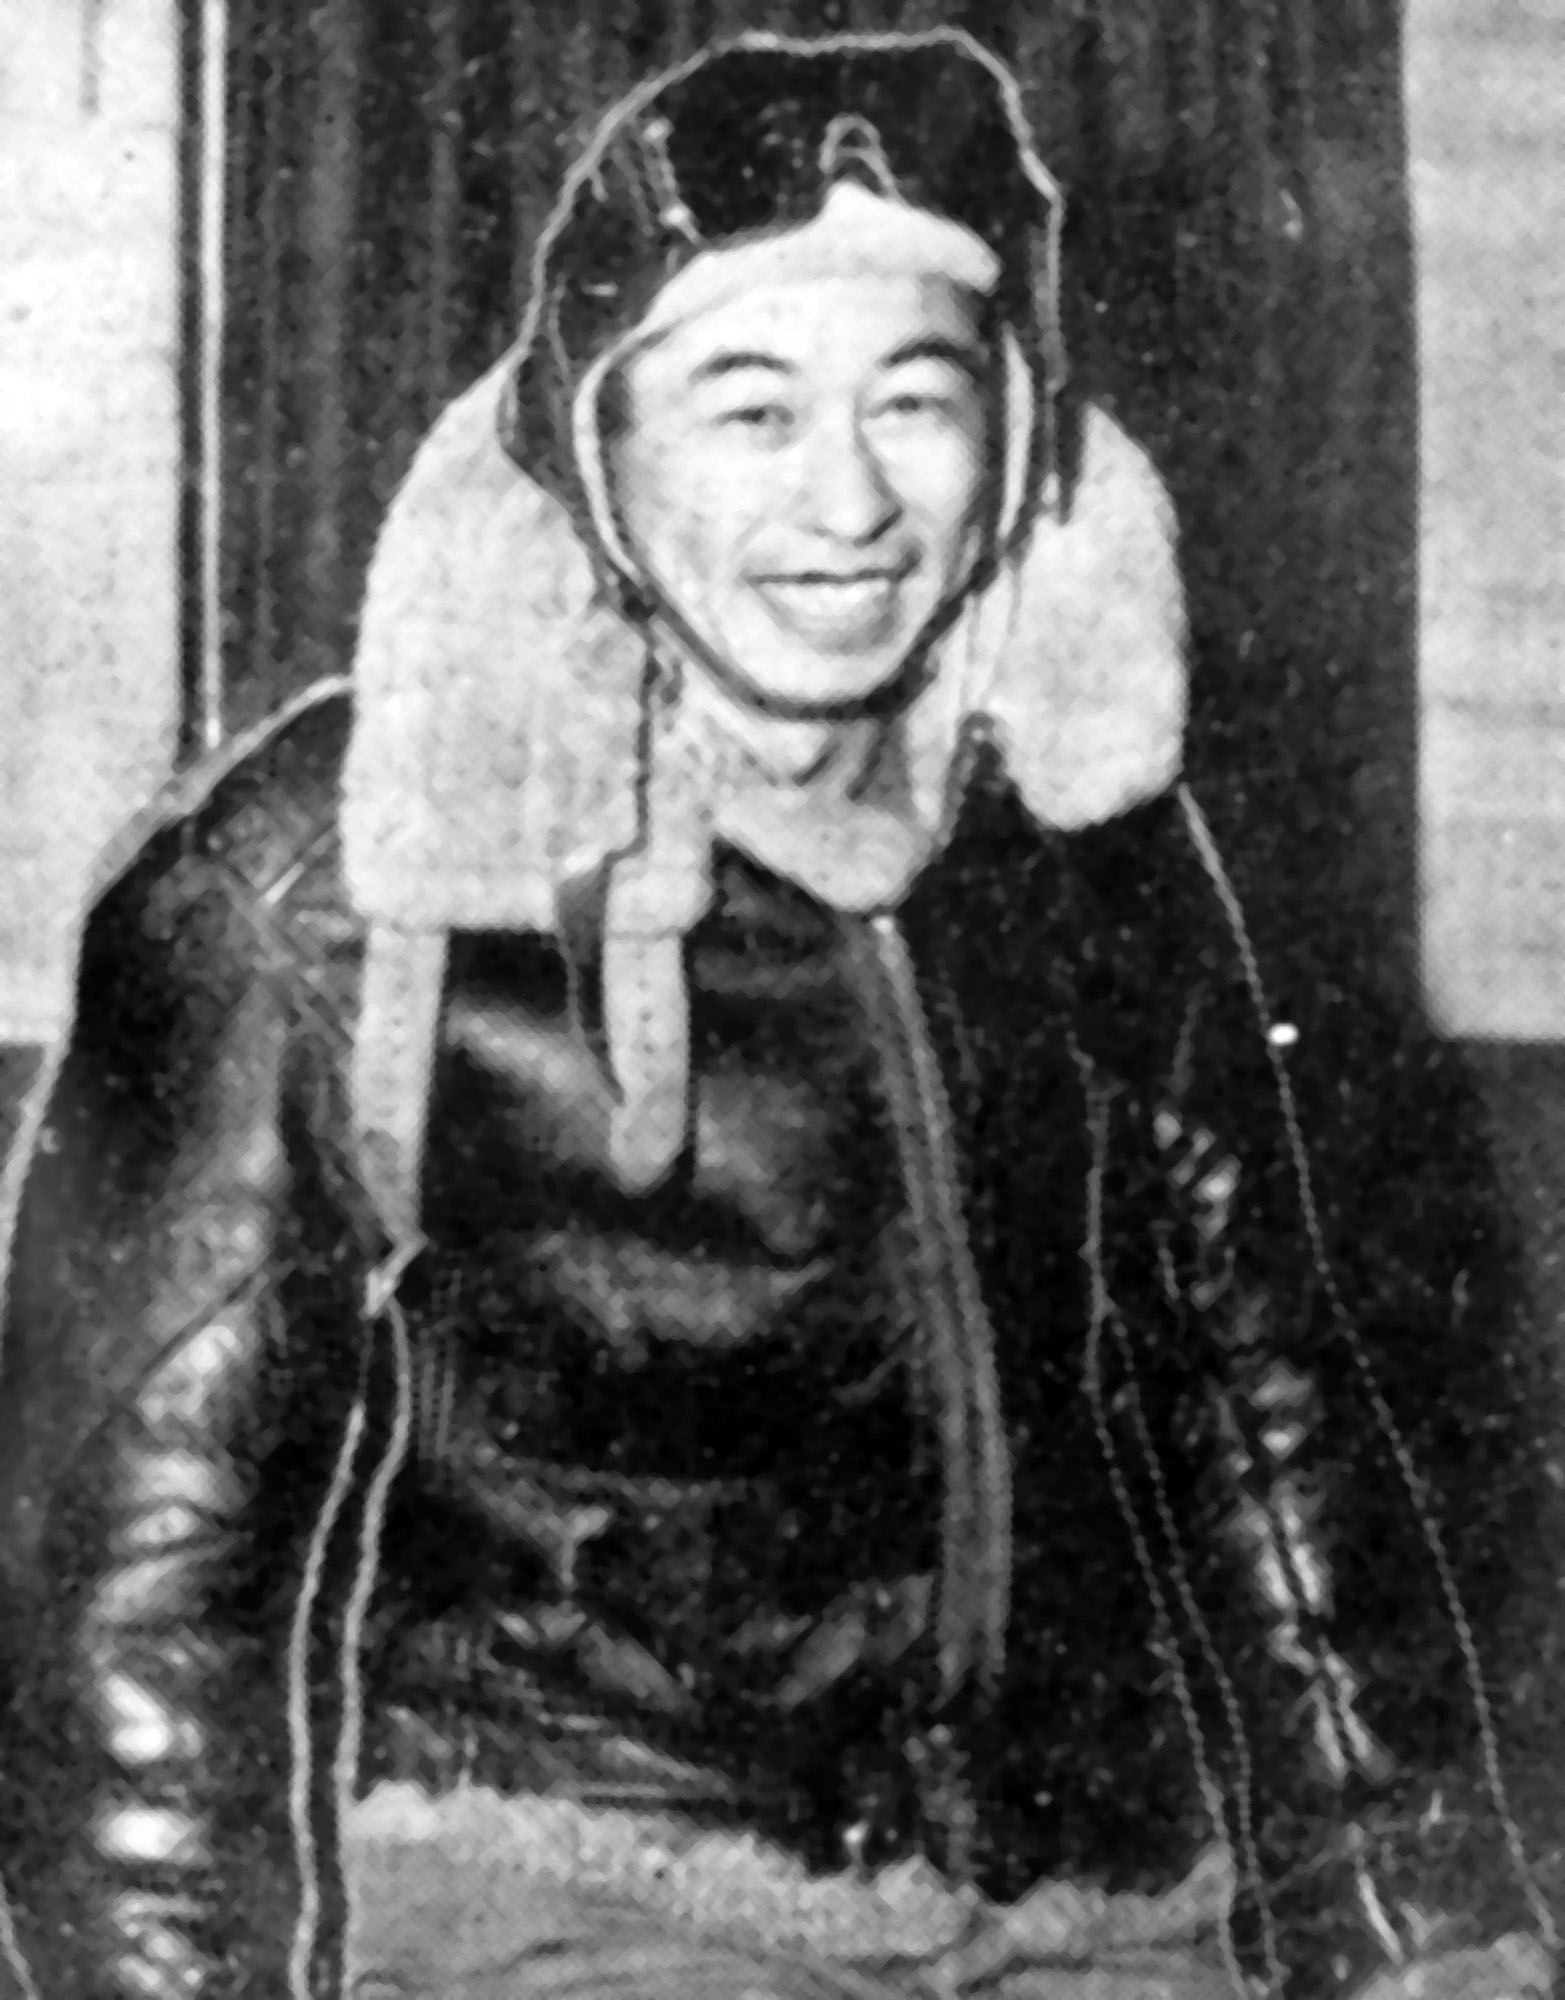 This undated file photo provided by Ben Kuroki shows him in his flying gear. Kuroki, the only Japanese American known to have flown over Japan during World War II, has died. He was 98. Kuroki's daughter, Julie Kuroki, told the Los Angeles Times that he died on Tuesday, Sept. 2 in Camarillo, Calif.